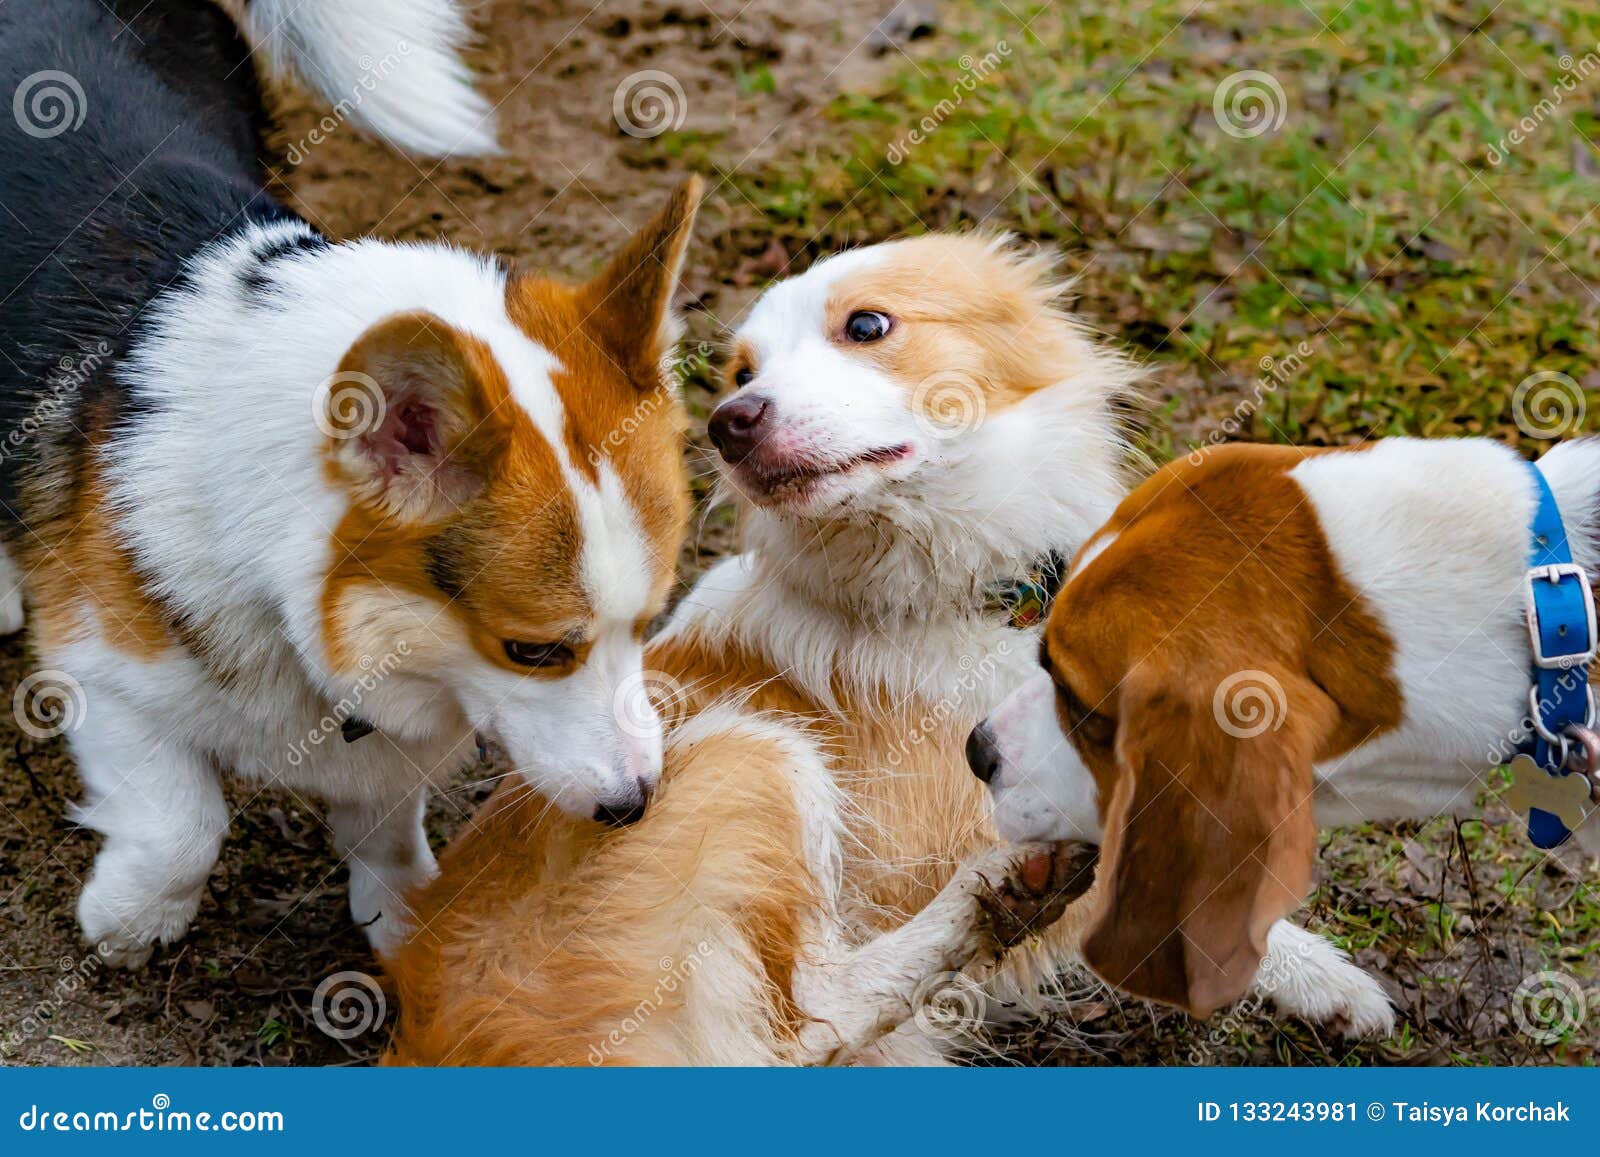 are welsh sheepdog aggressive